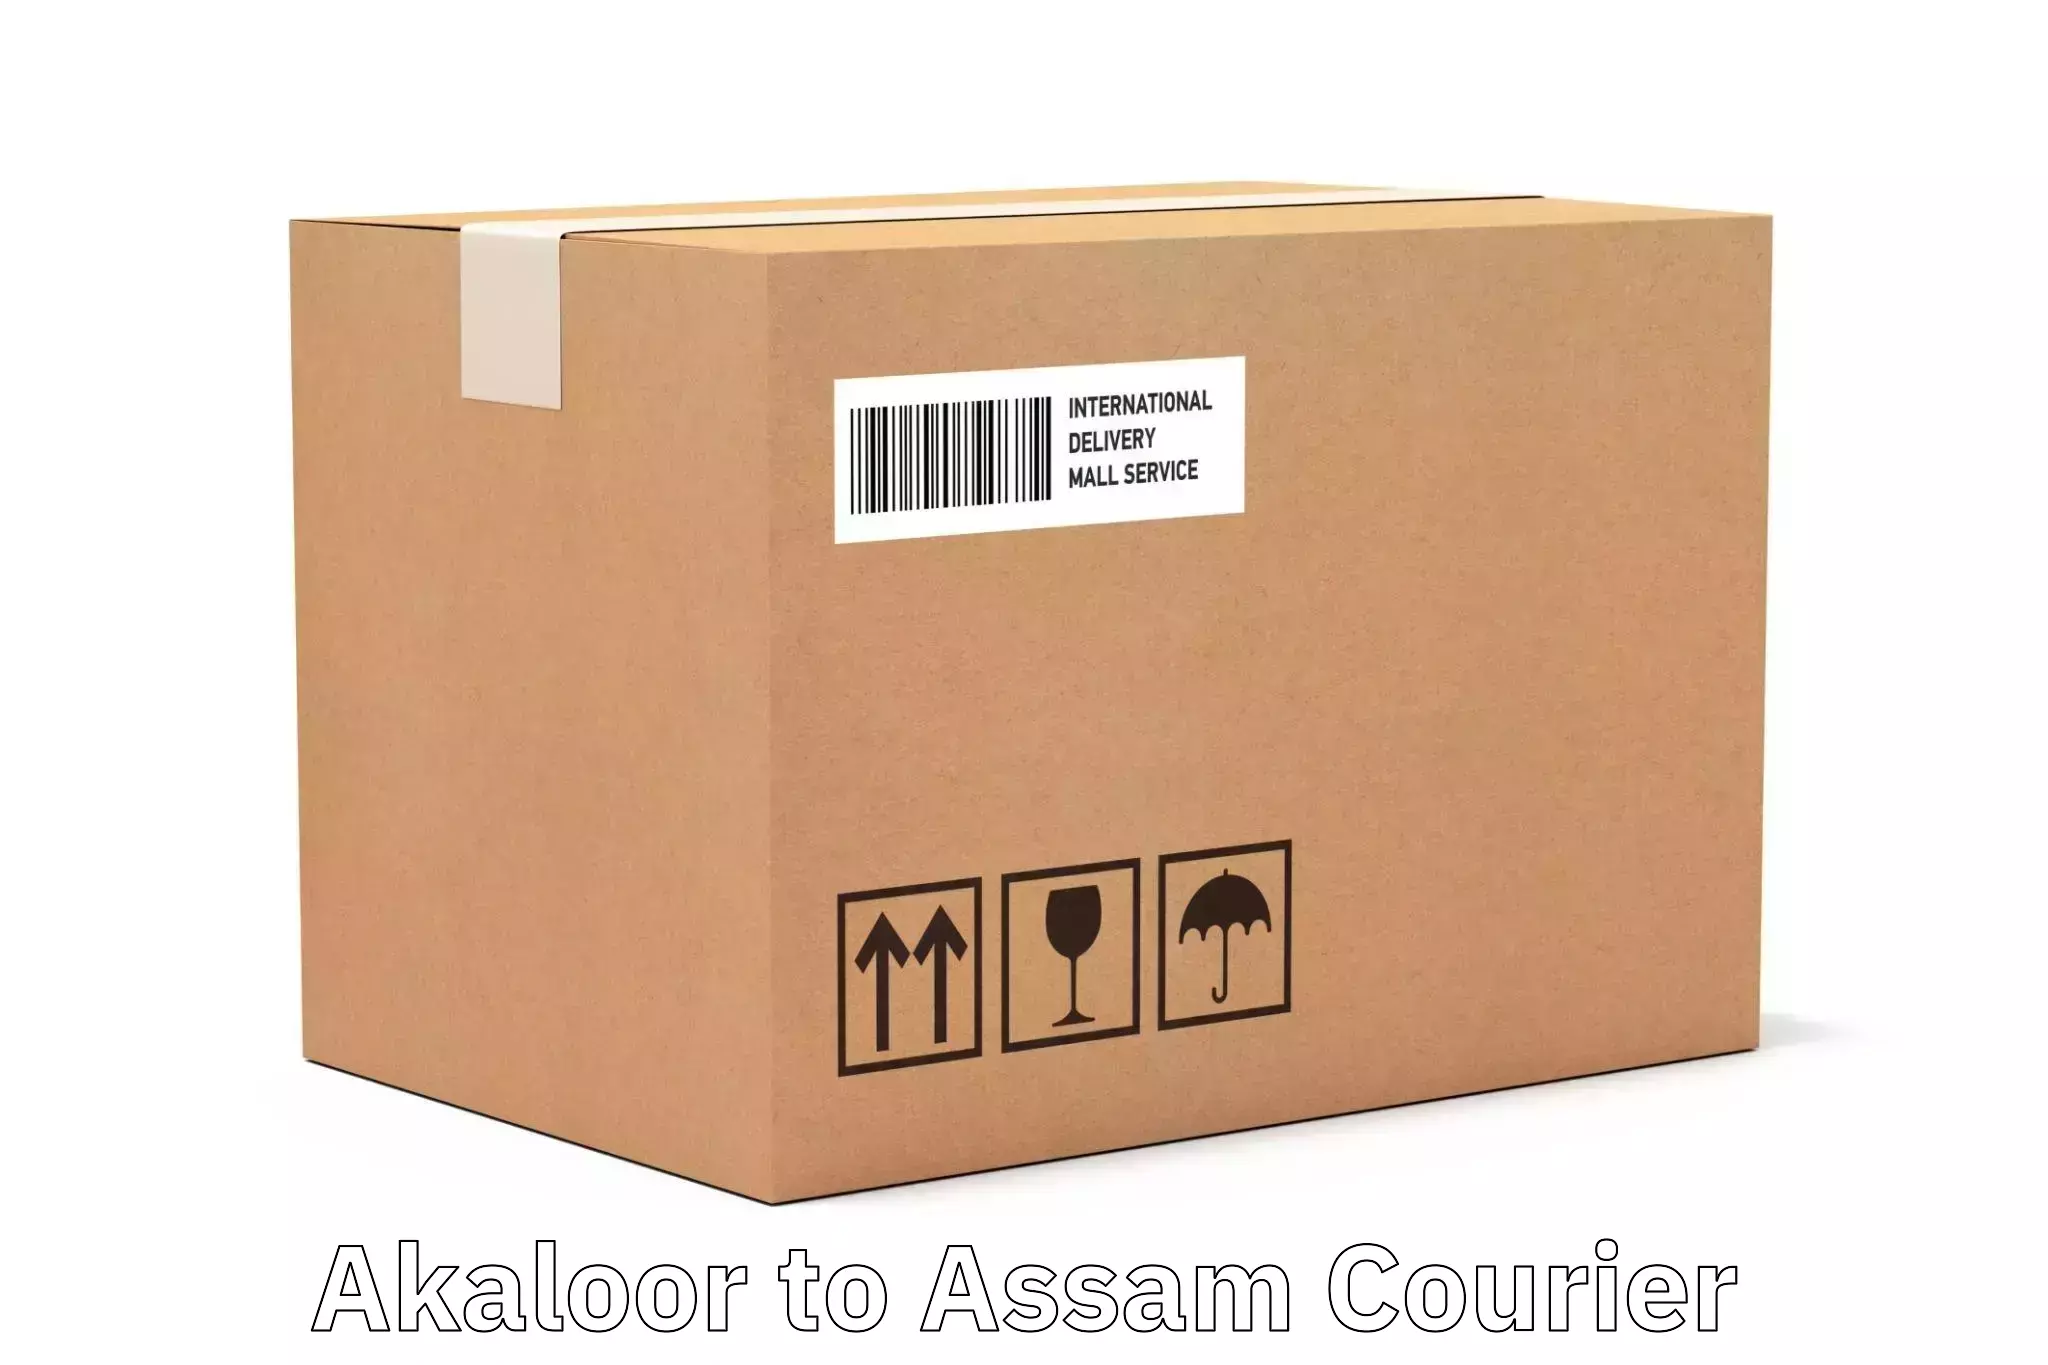 Next-generation courier services Akaloor to Lala Assam